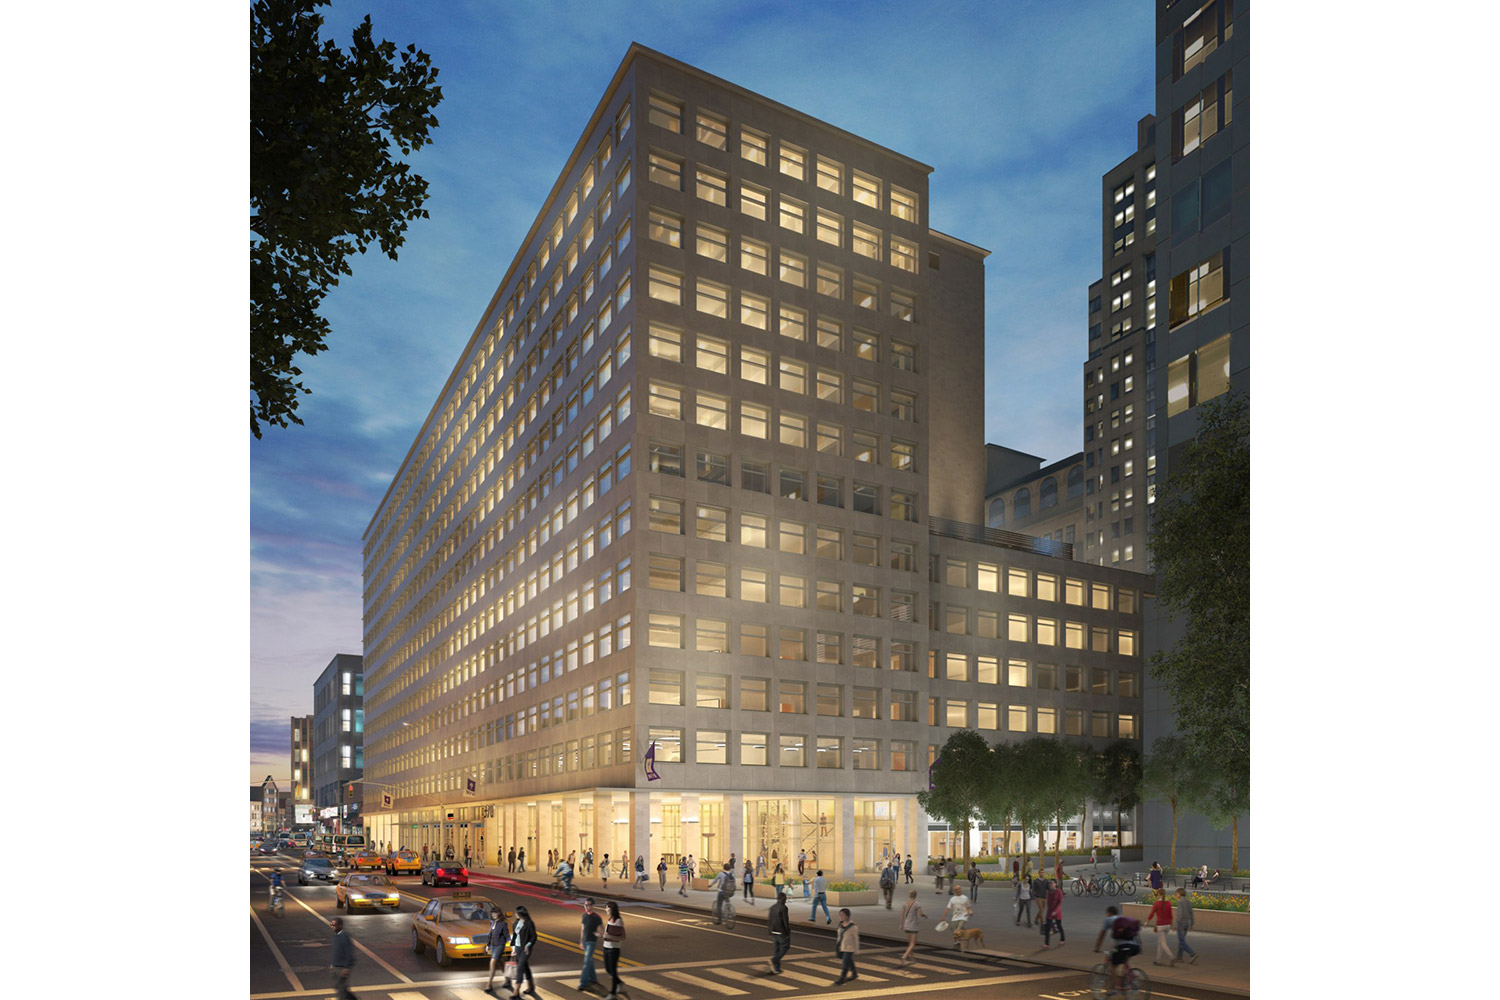 WSDG was engaged to design three key elements for th NYU Jay Street sustainable technology Center. Immersive audio lab, garage media and motion capture lab. Exterior Render.